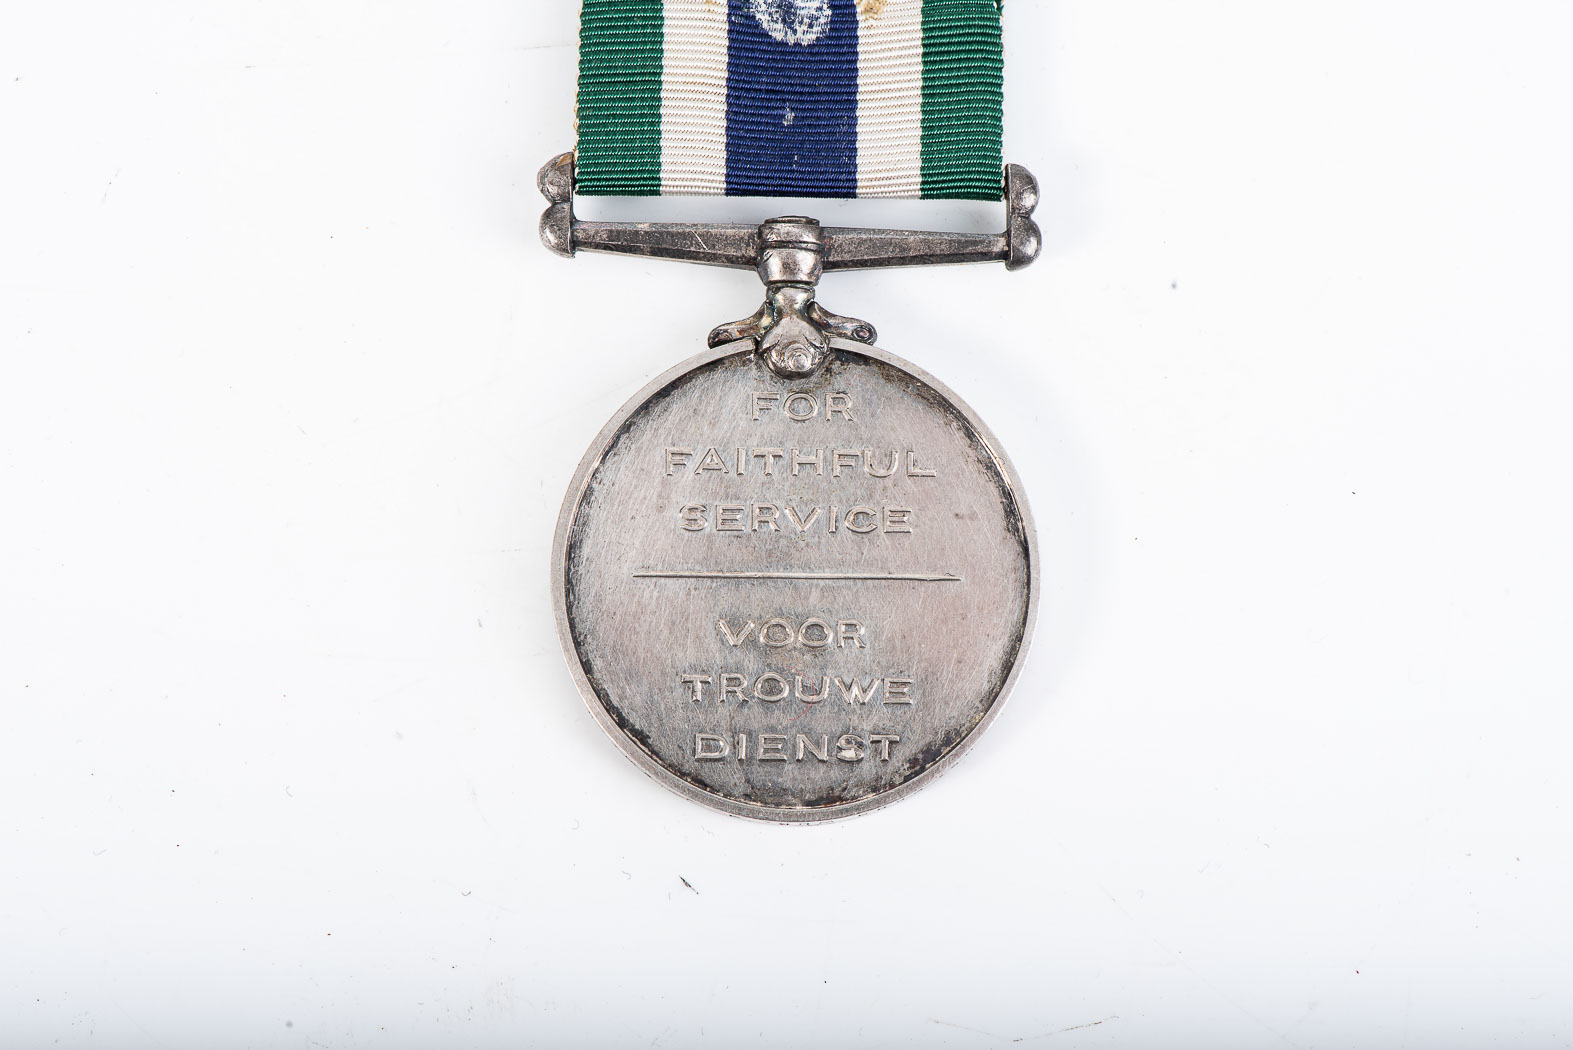 SOUTH AFRICAN FAITHFUL SERVICE PRISON MEDAL No. 2609 Warden J.J. SWART. Instituted 1965. Full size - Image 2 of 3